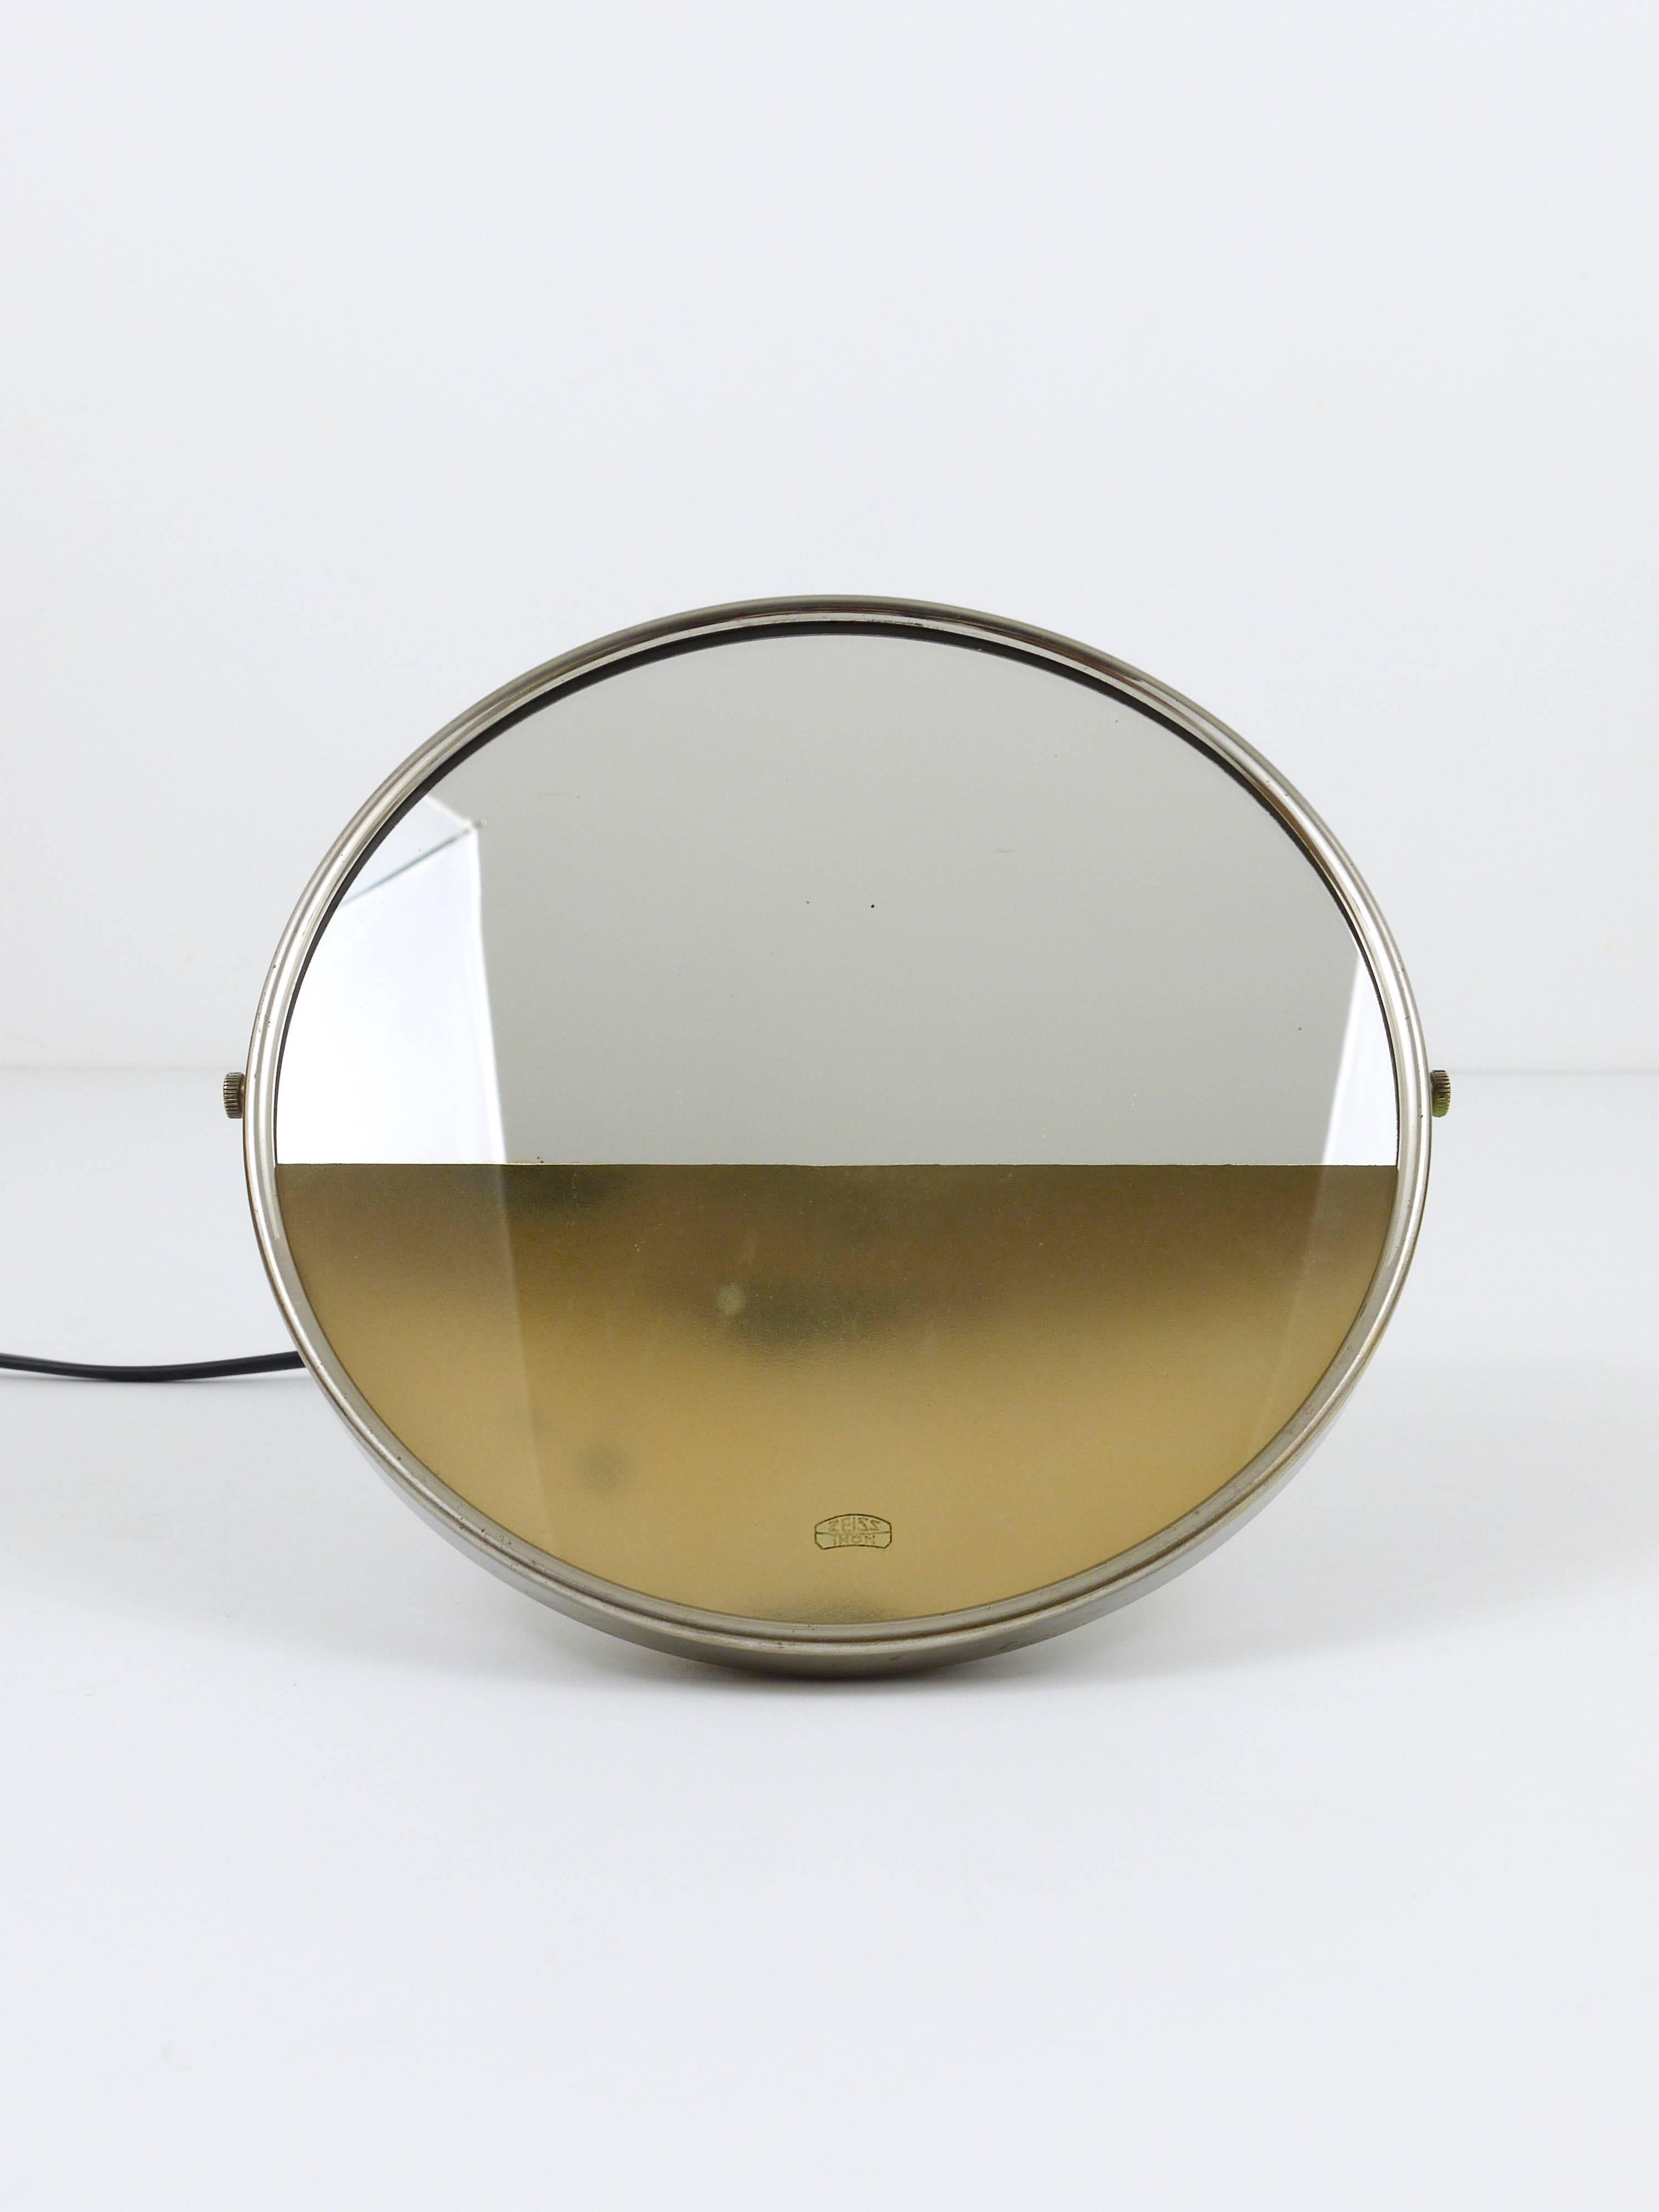 A beautiful illuminated Bauhaus vanity mirror, designed by Marcel Breuer in 1930, executed by Zeiss Ikon, Berlin, Germany. Made of nickel-plated metal and mirror. To be used on a table or wall-hanging. In good condition with nice patina.